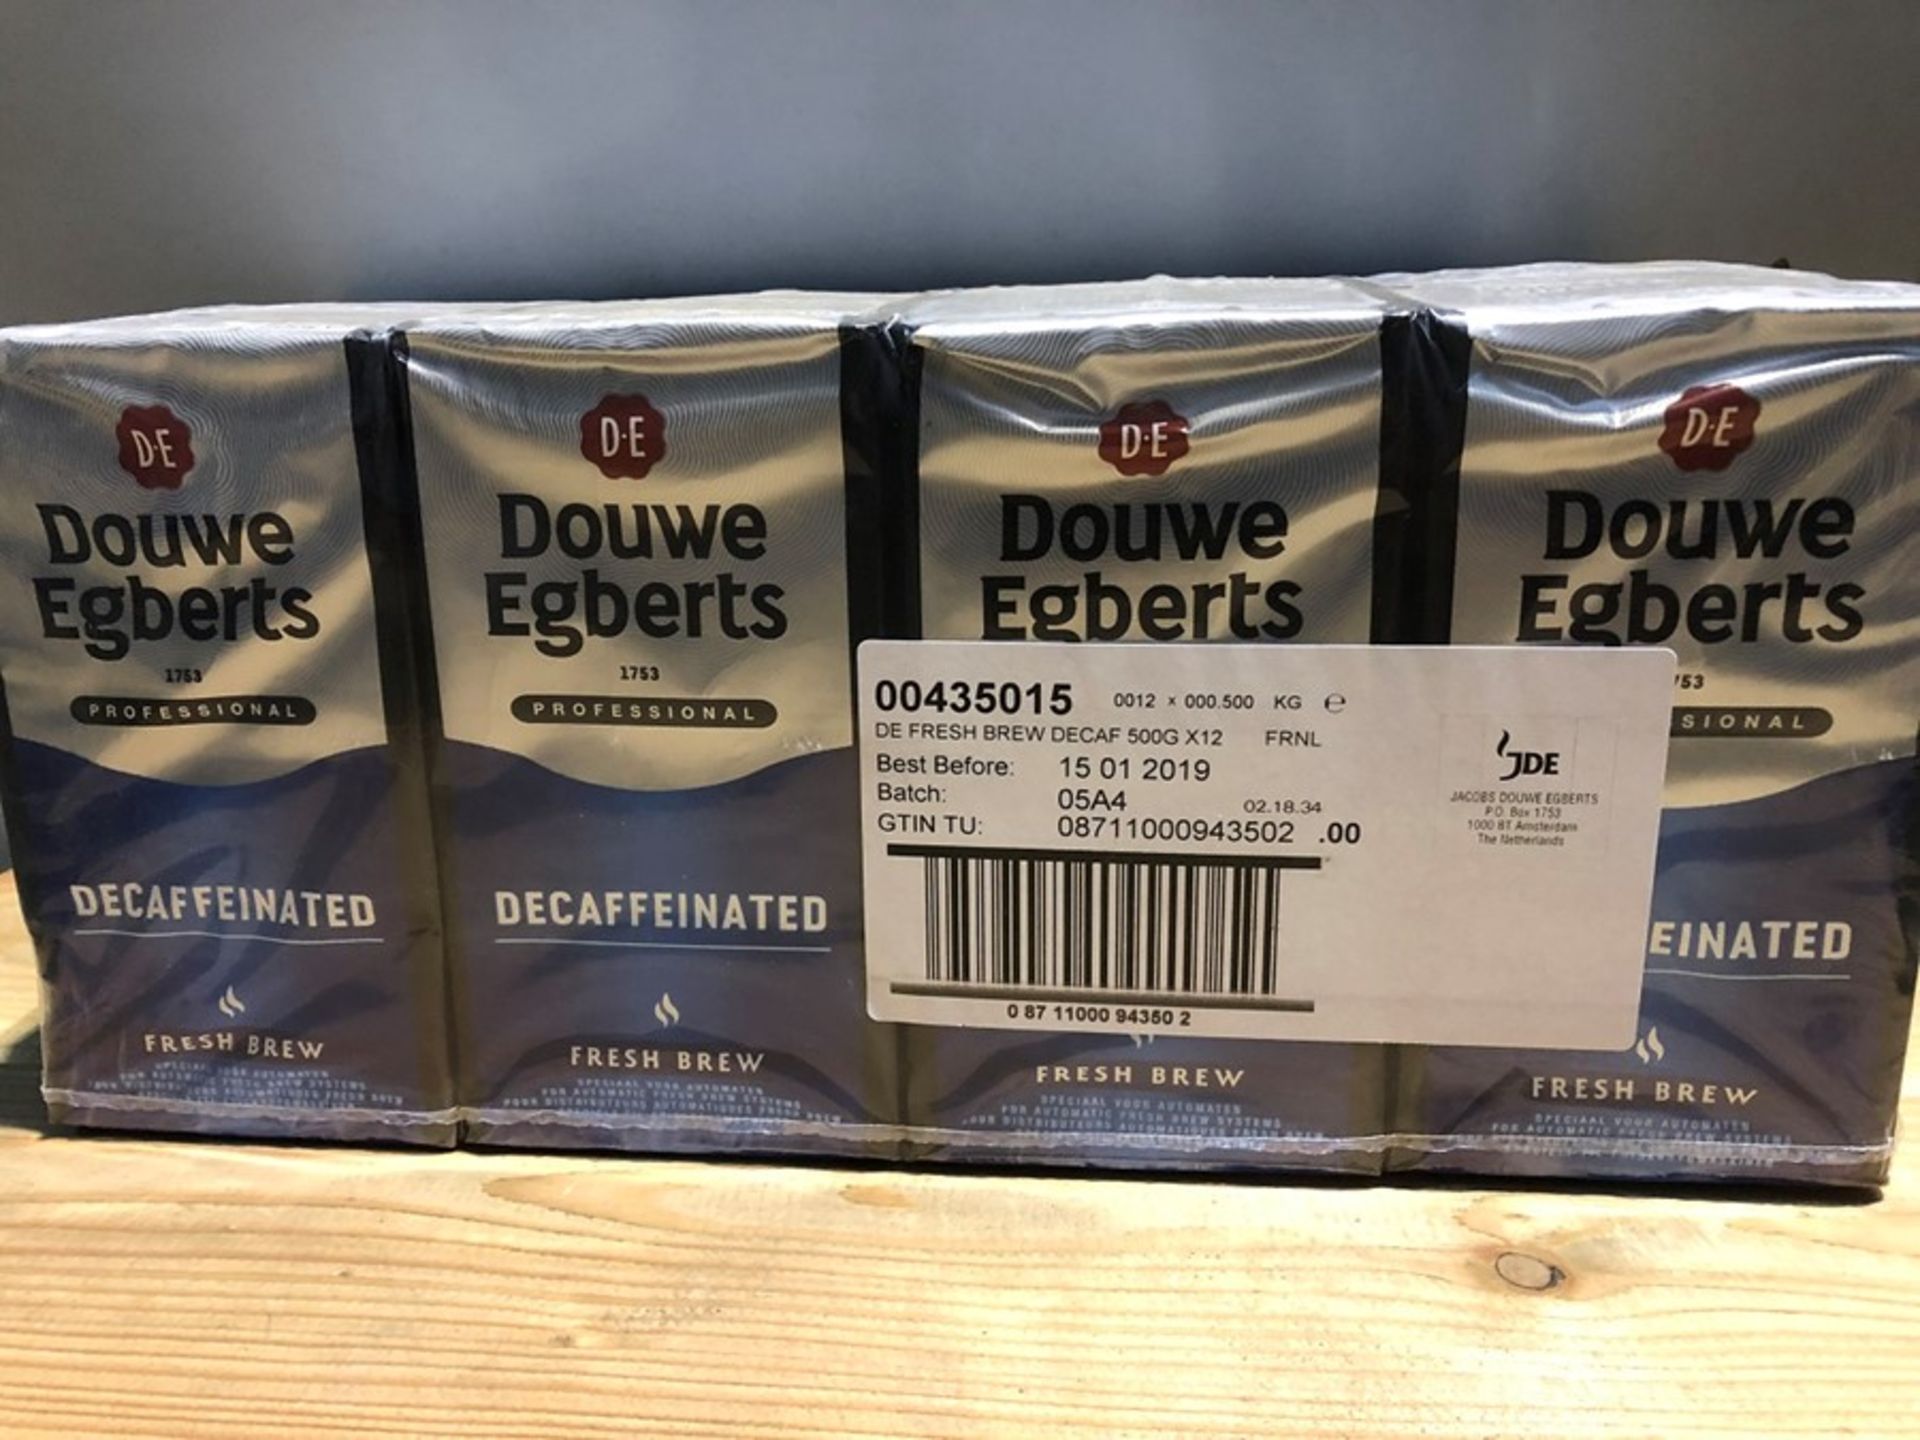 1 LOT TO CONTAIN 2 PACKS OF 12 DOUWE EGBERTS DECAFFINATED COFFEE / BEST BEFORE: 15/01/2019 (PUBLIC